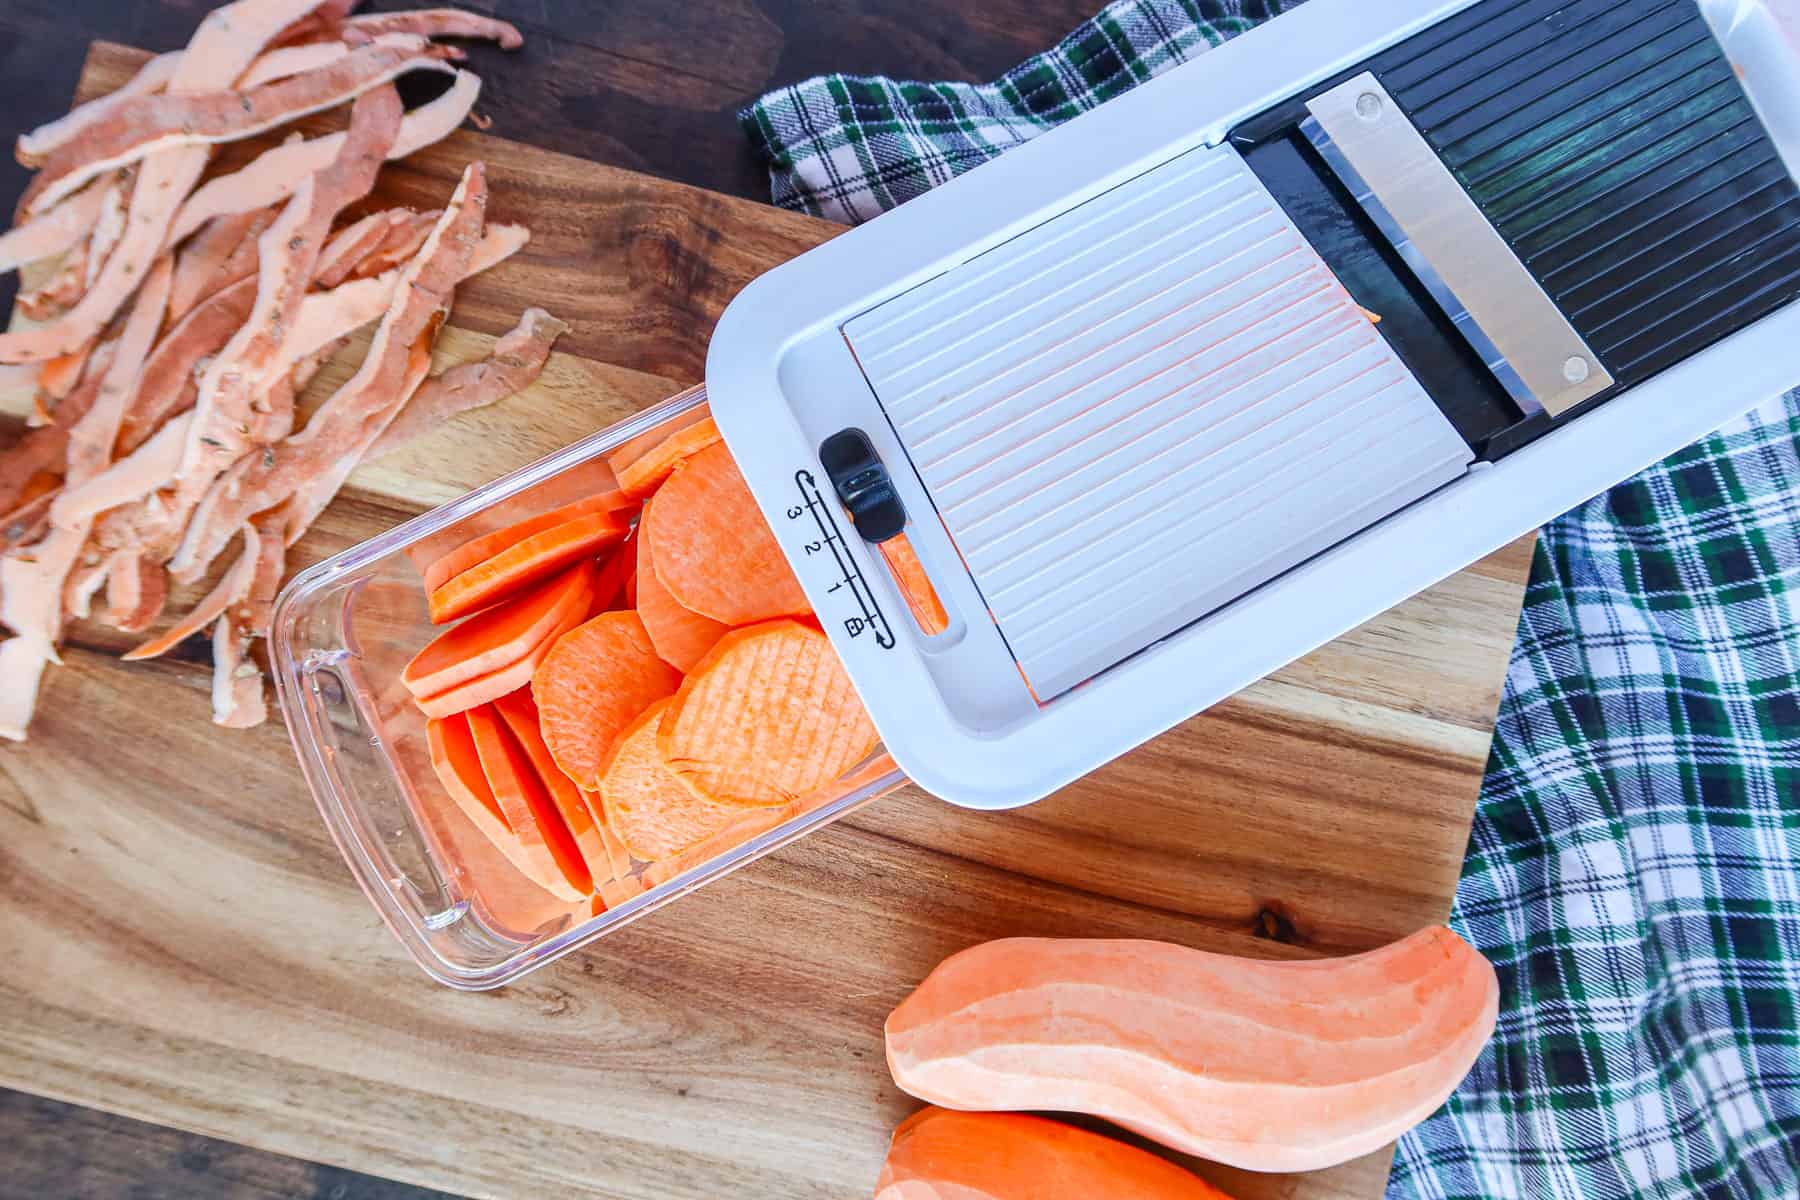 Cutting sweet potatoes into medallions with mandolin slicer.